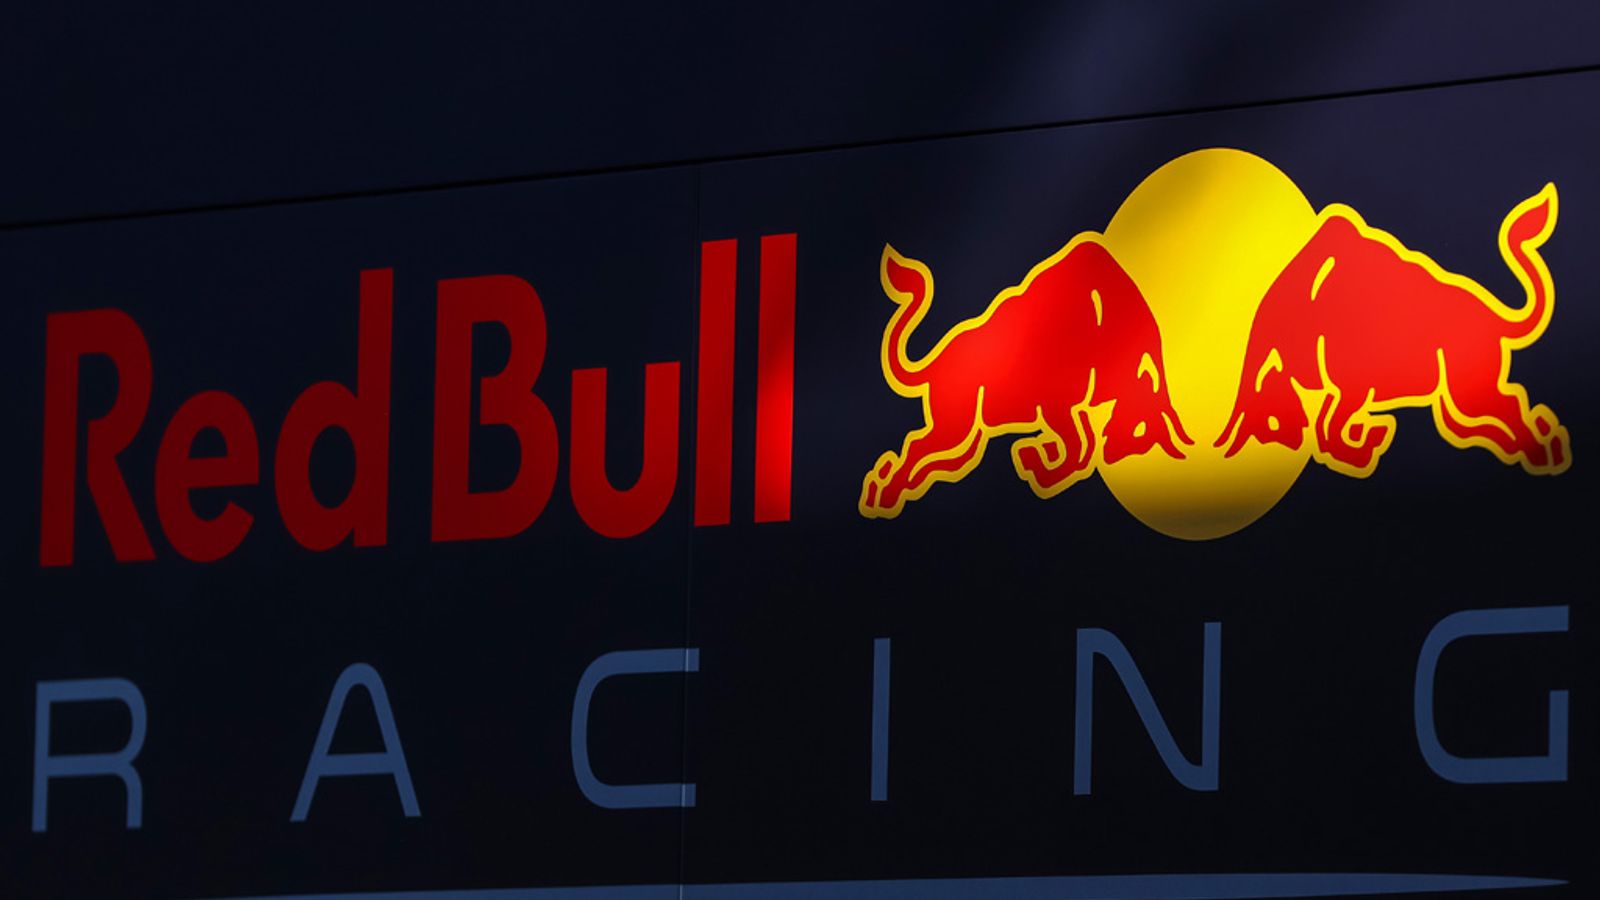 F1 2018: Aston Martin to become Red Bull's title partners | F1 News ...